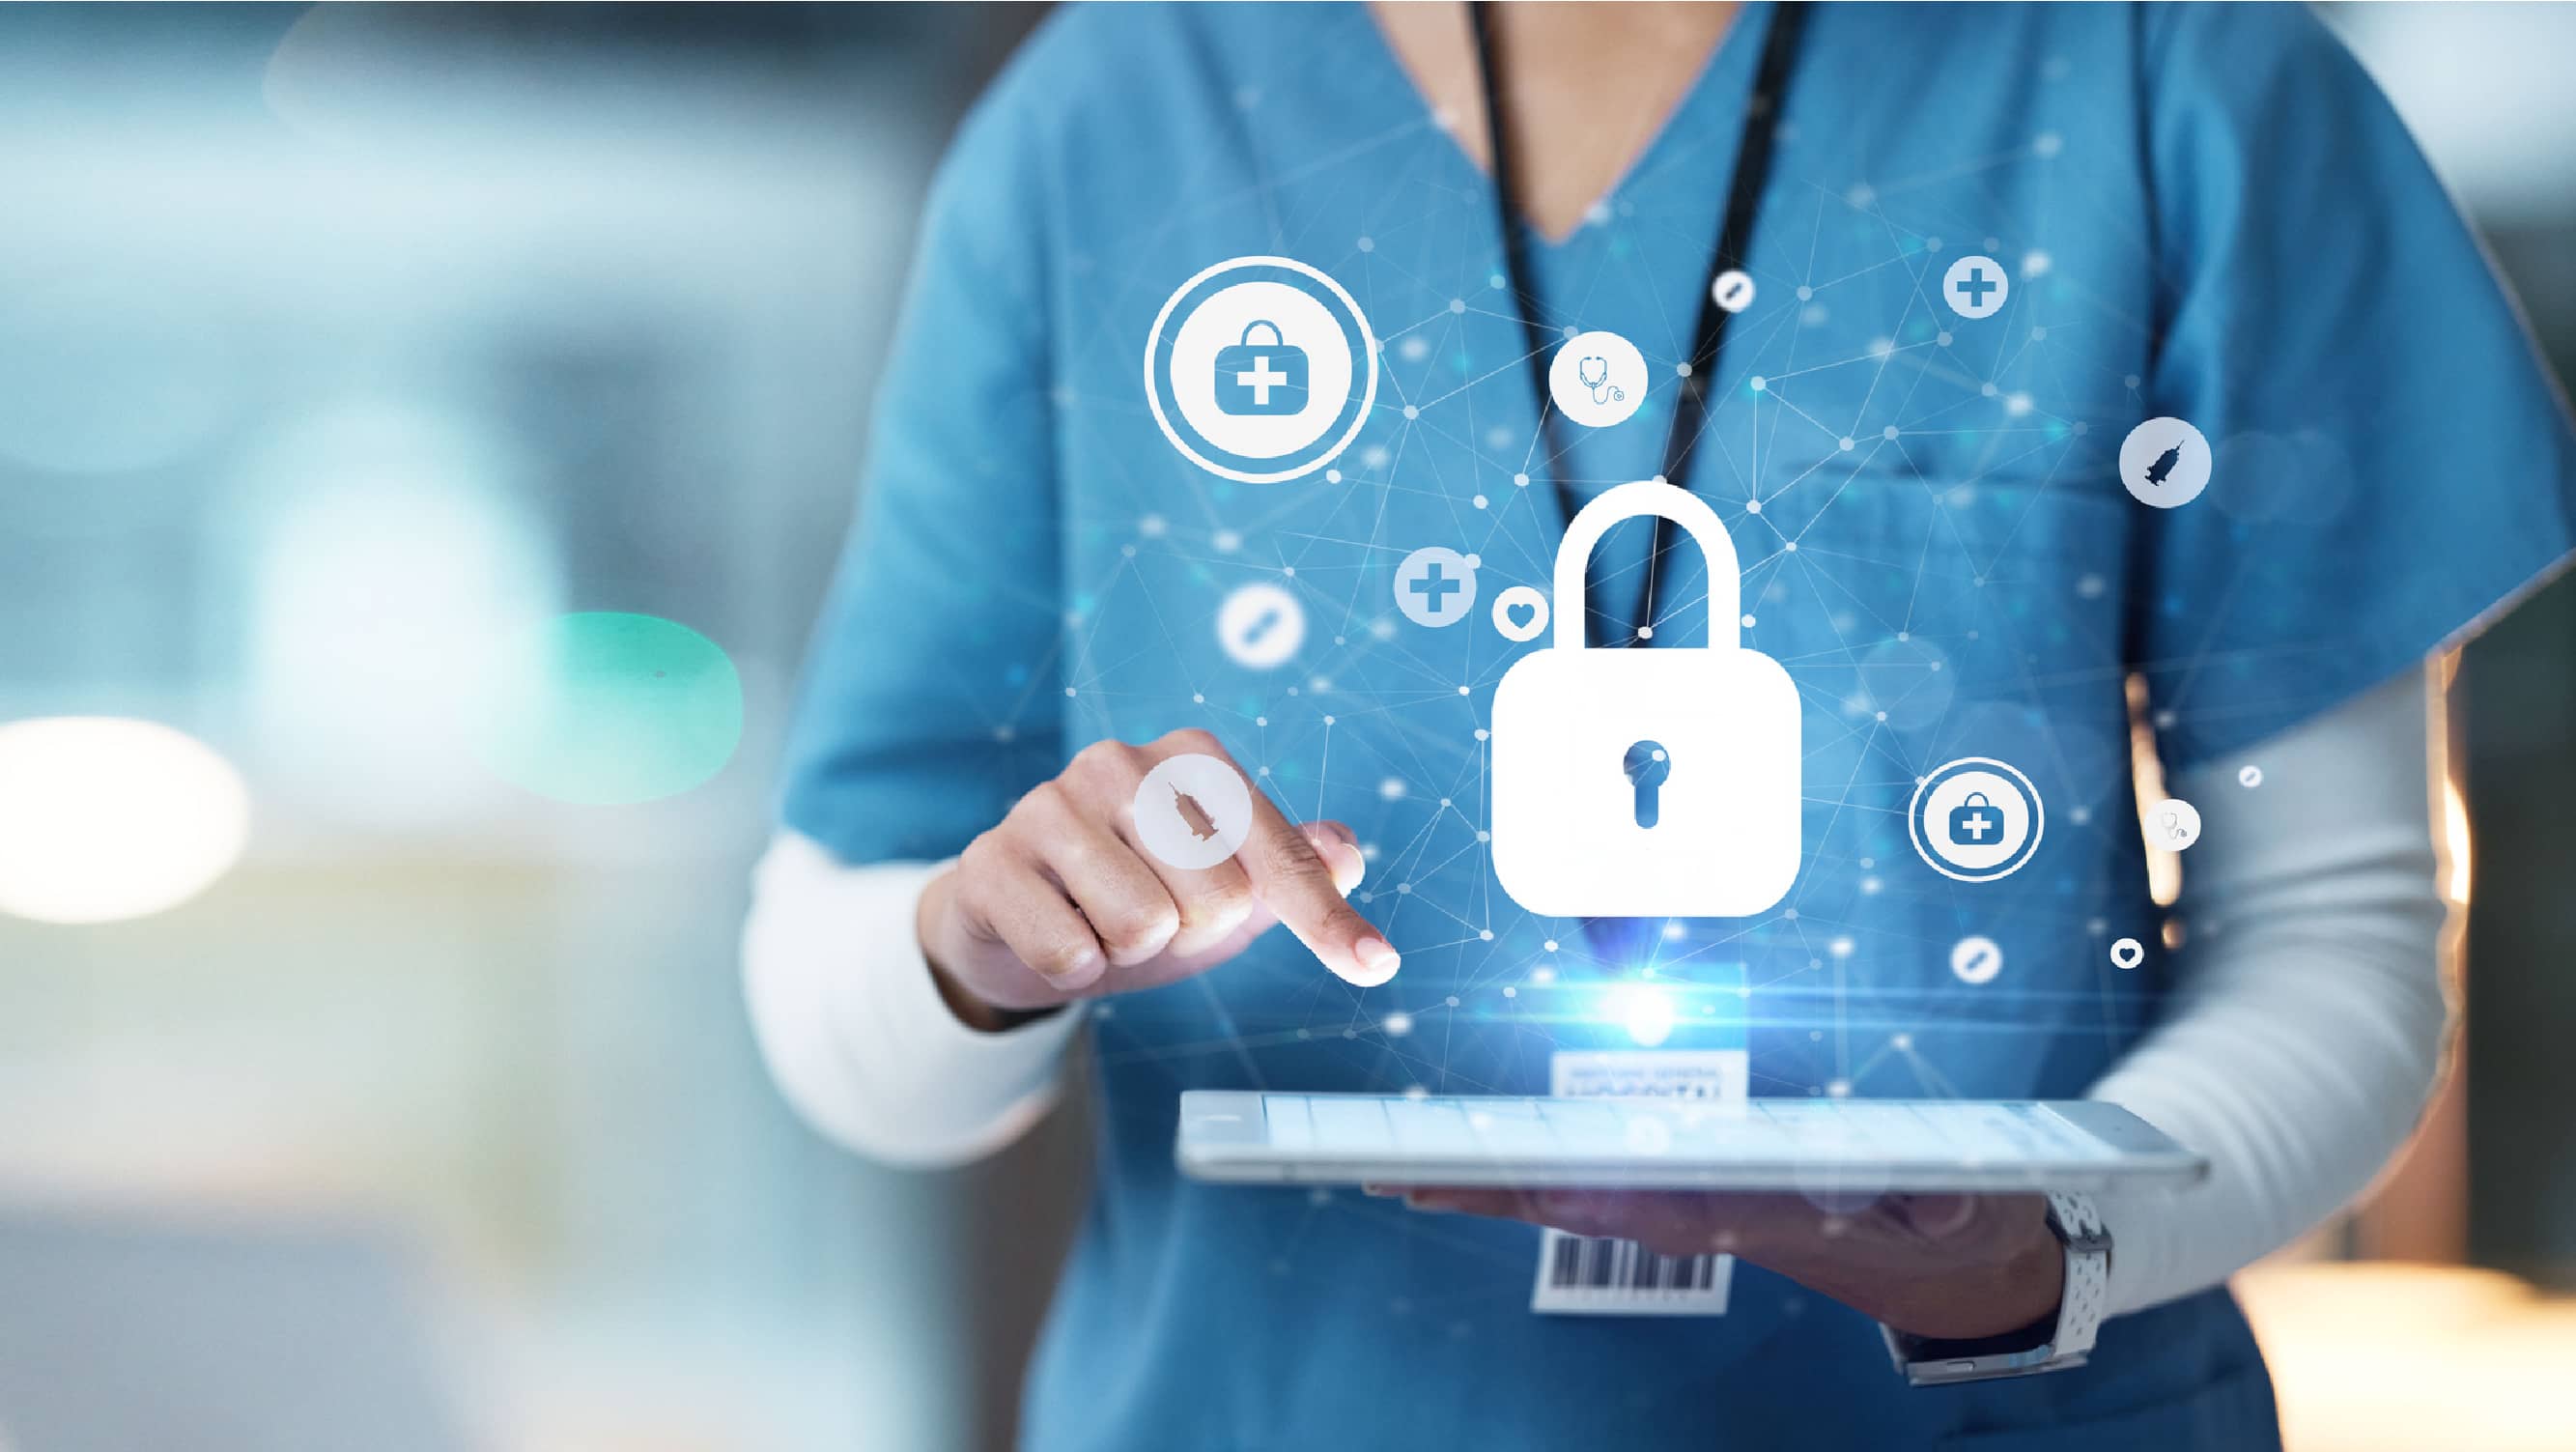 Ransomware and Cyber Attacks in Healthcare - Part 2